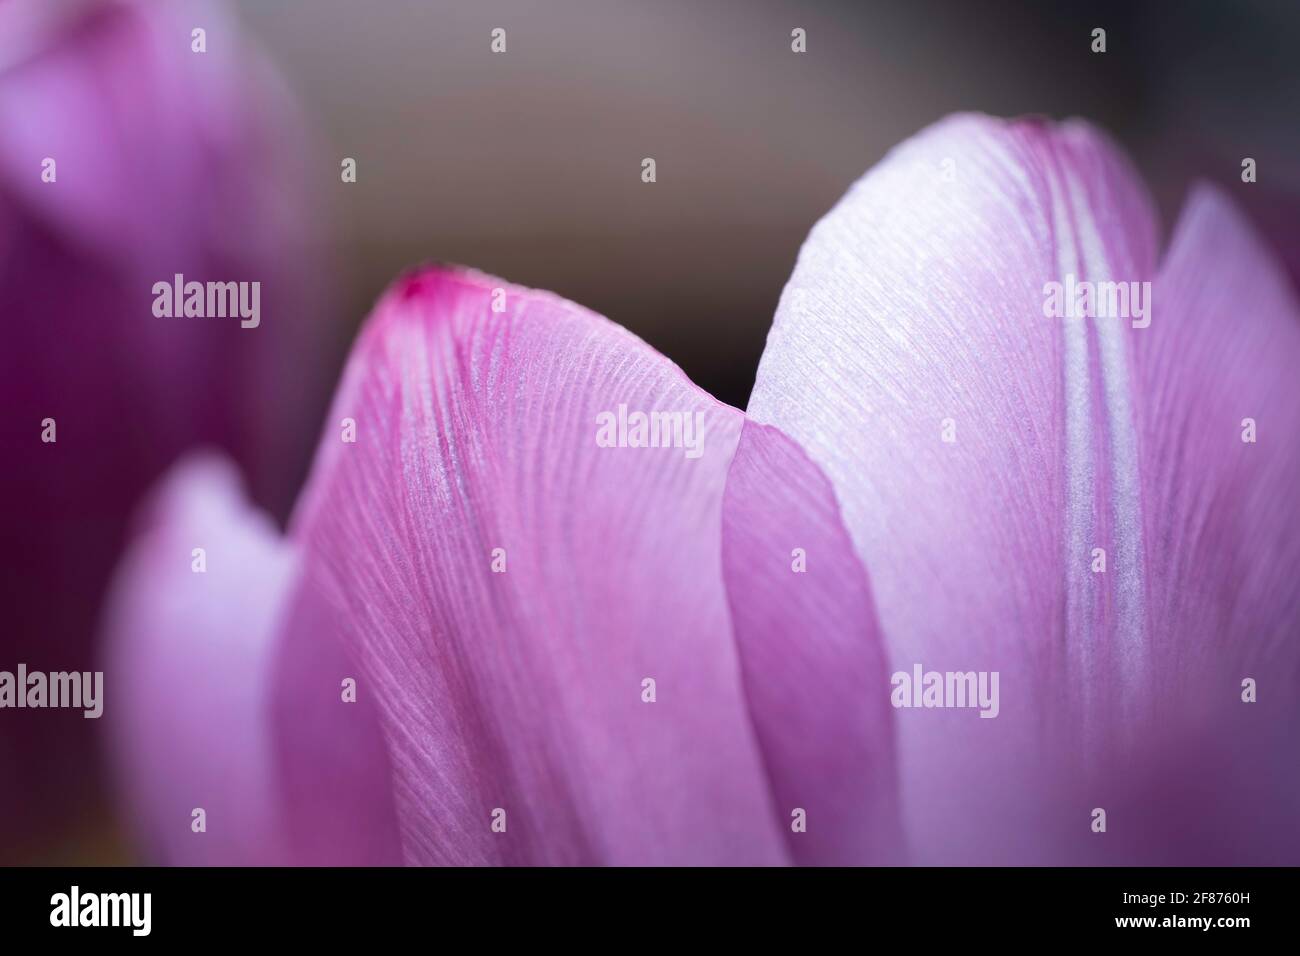 Macro photo of some petals of a single light purple tulip with blurred dark background Stock Photo